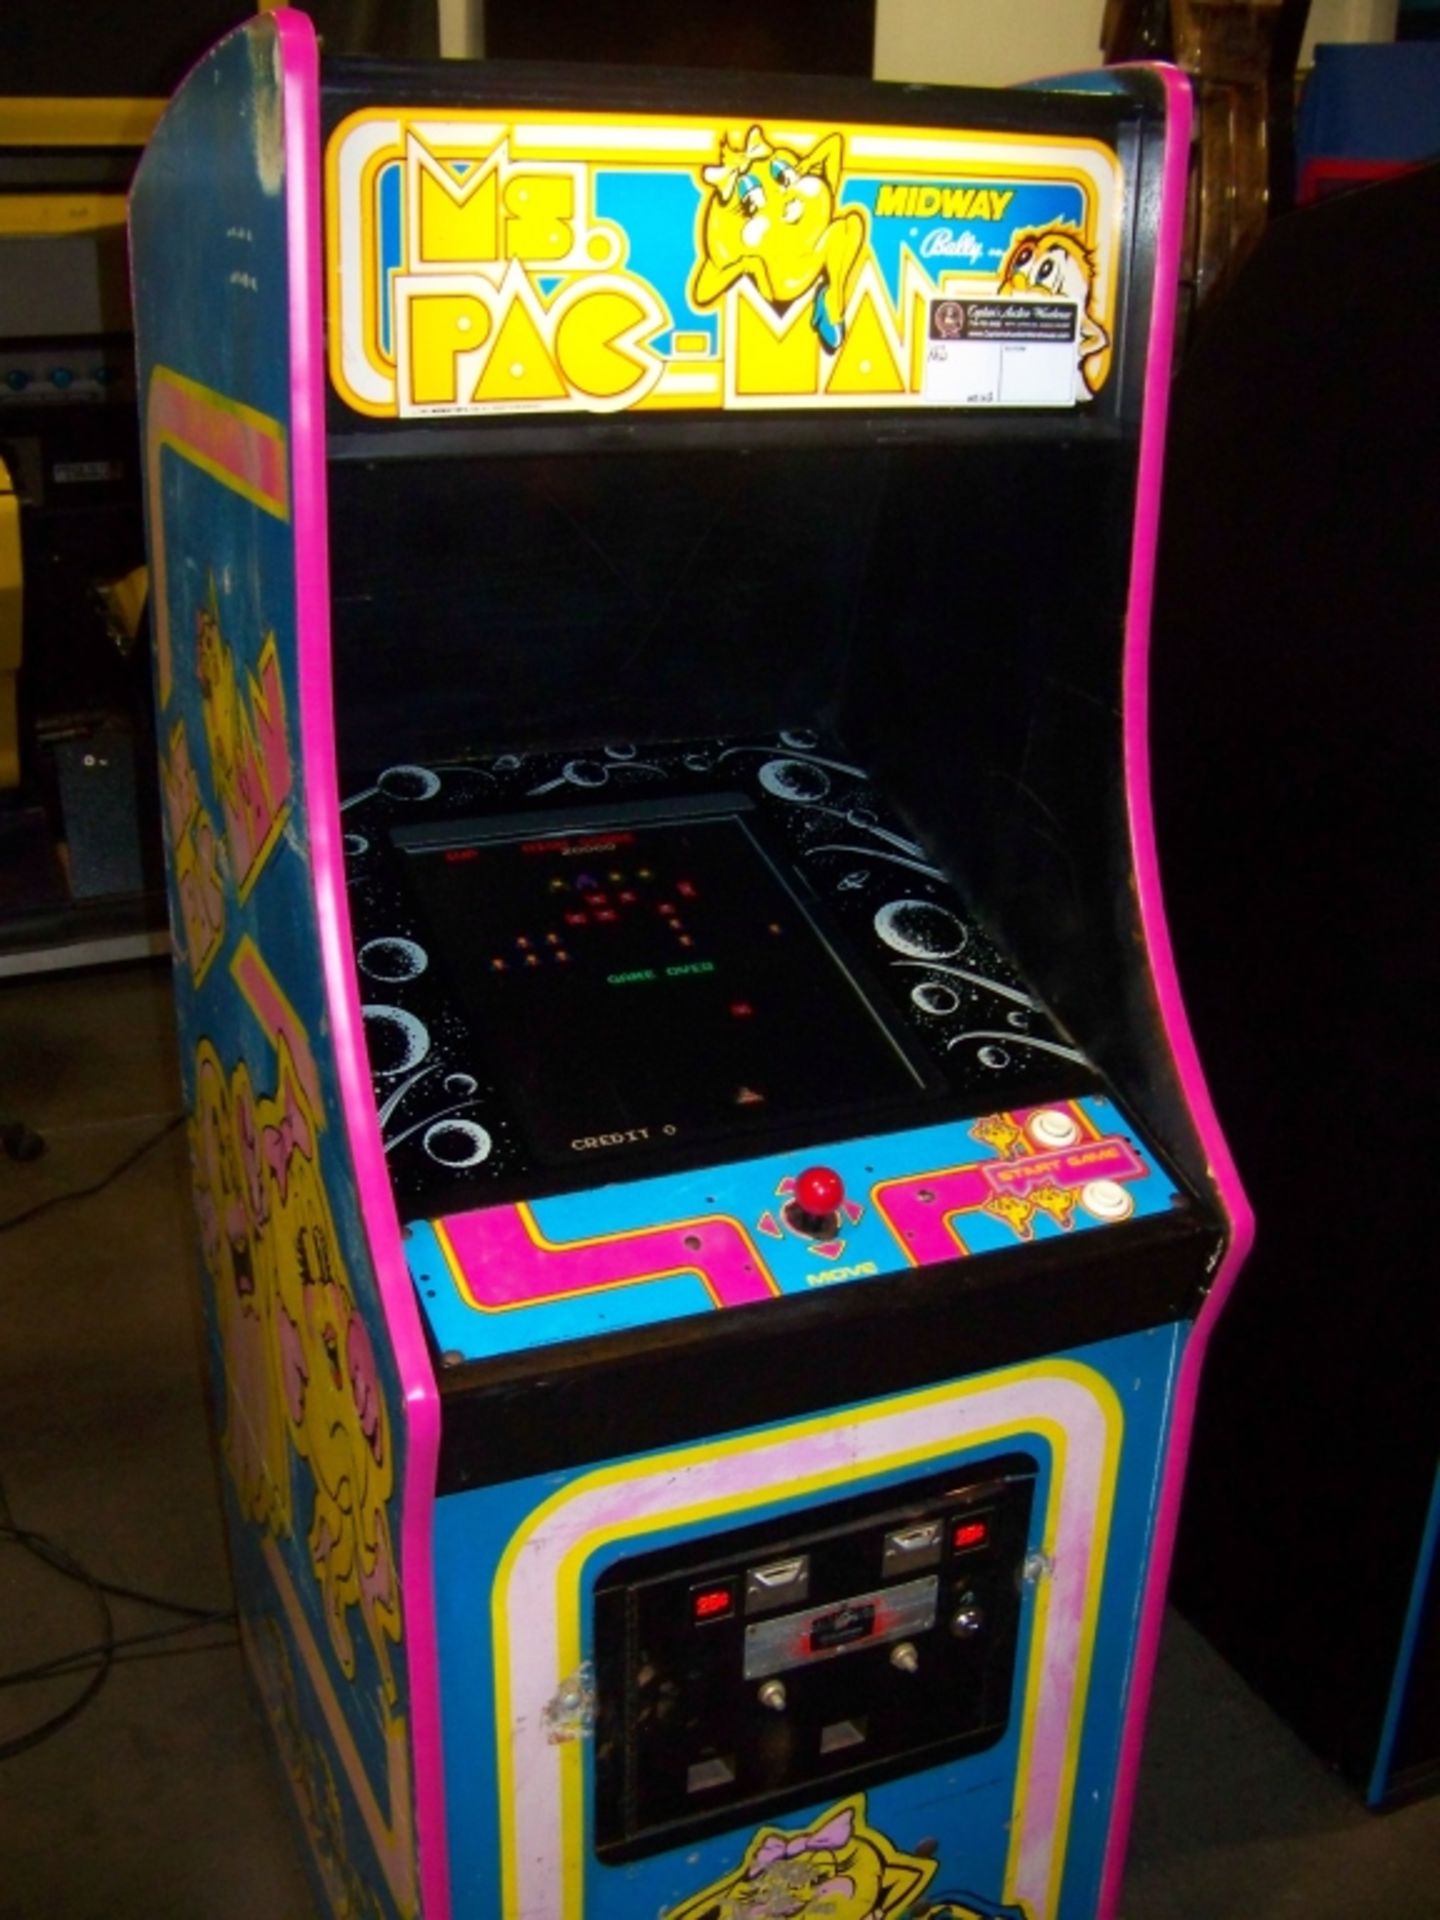 MULTICADE MS PACMAN 60 IN 1 UPRIGHT ARCADE GAME - Image 4 of 7